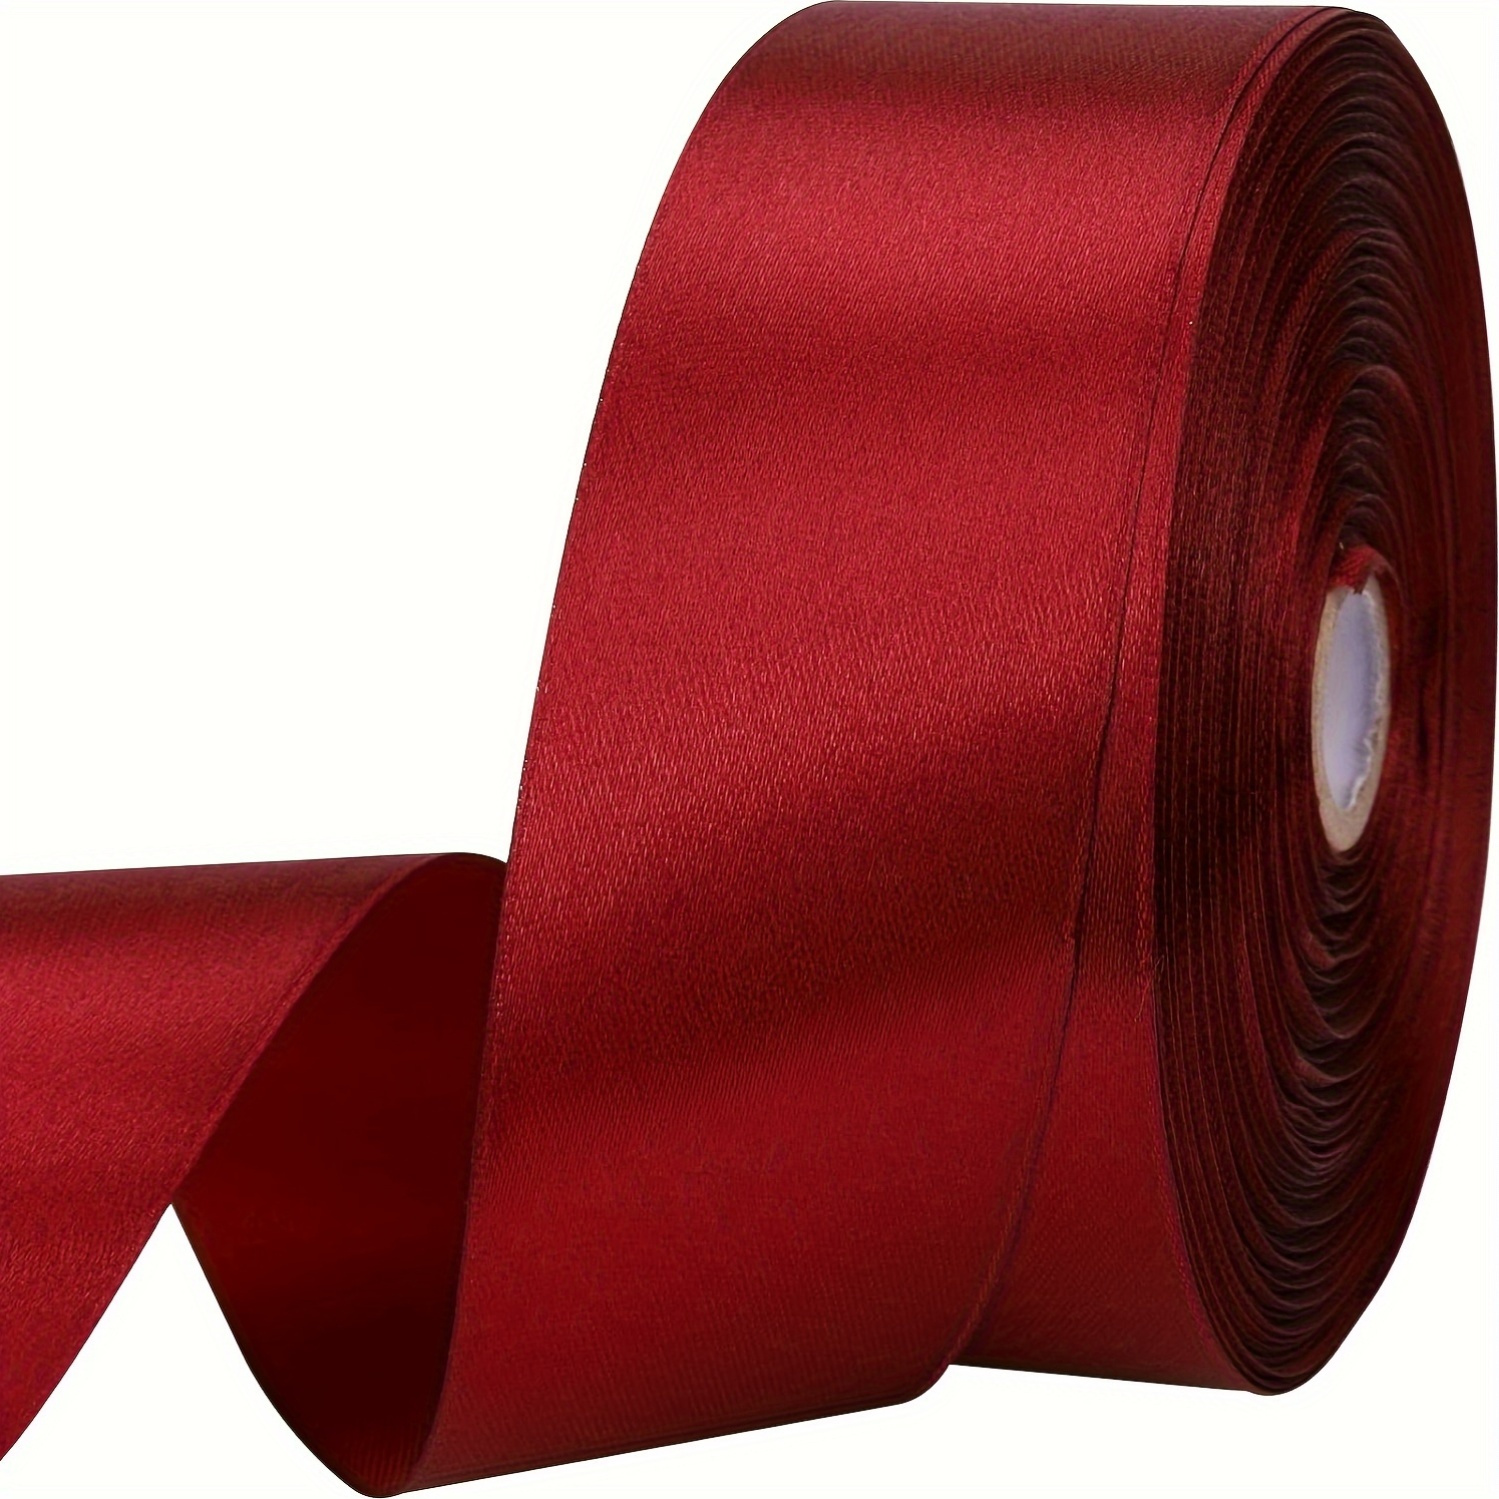 

1 Roll Of 1.5" X 50 Yards Satin Ribbon In Solid Colors - Perfect For Gift Wrapping, Flower Arrangements, Crafts, Wedding Decorations, Christmas, And Sewing Projects